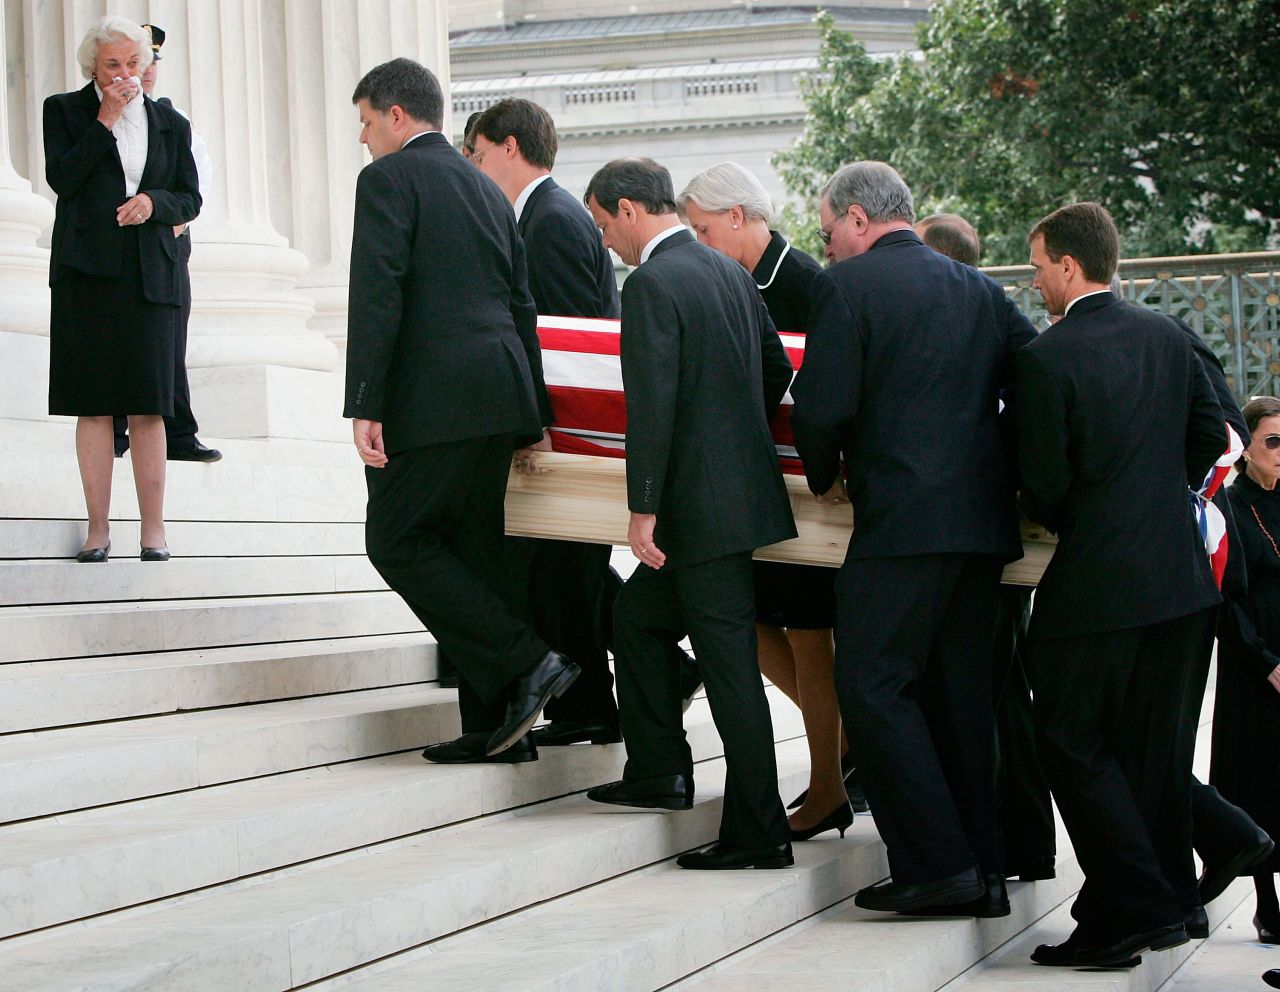 O'Connor weeps as Roberts and other pallbearers carry Rehnquist's casket into the Supreme Court. Roberts was once a law clerk for Rehnquist.